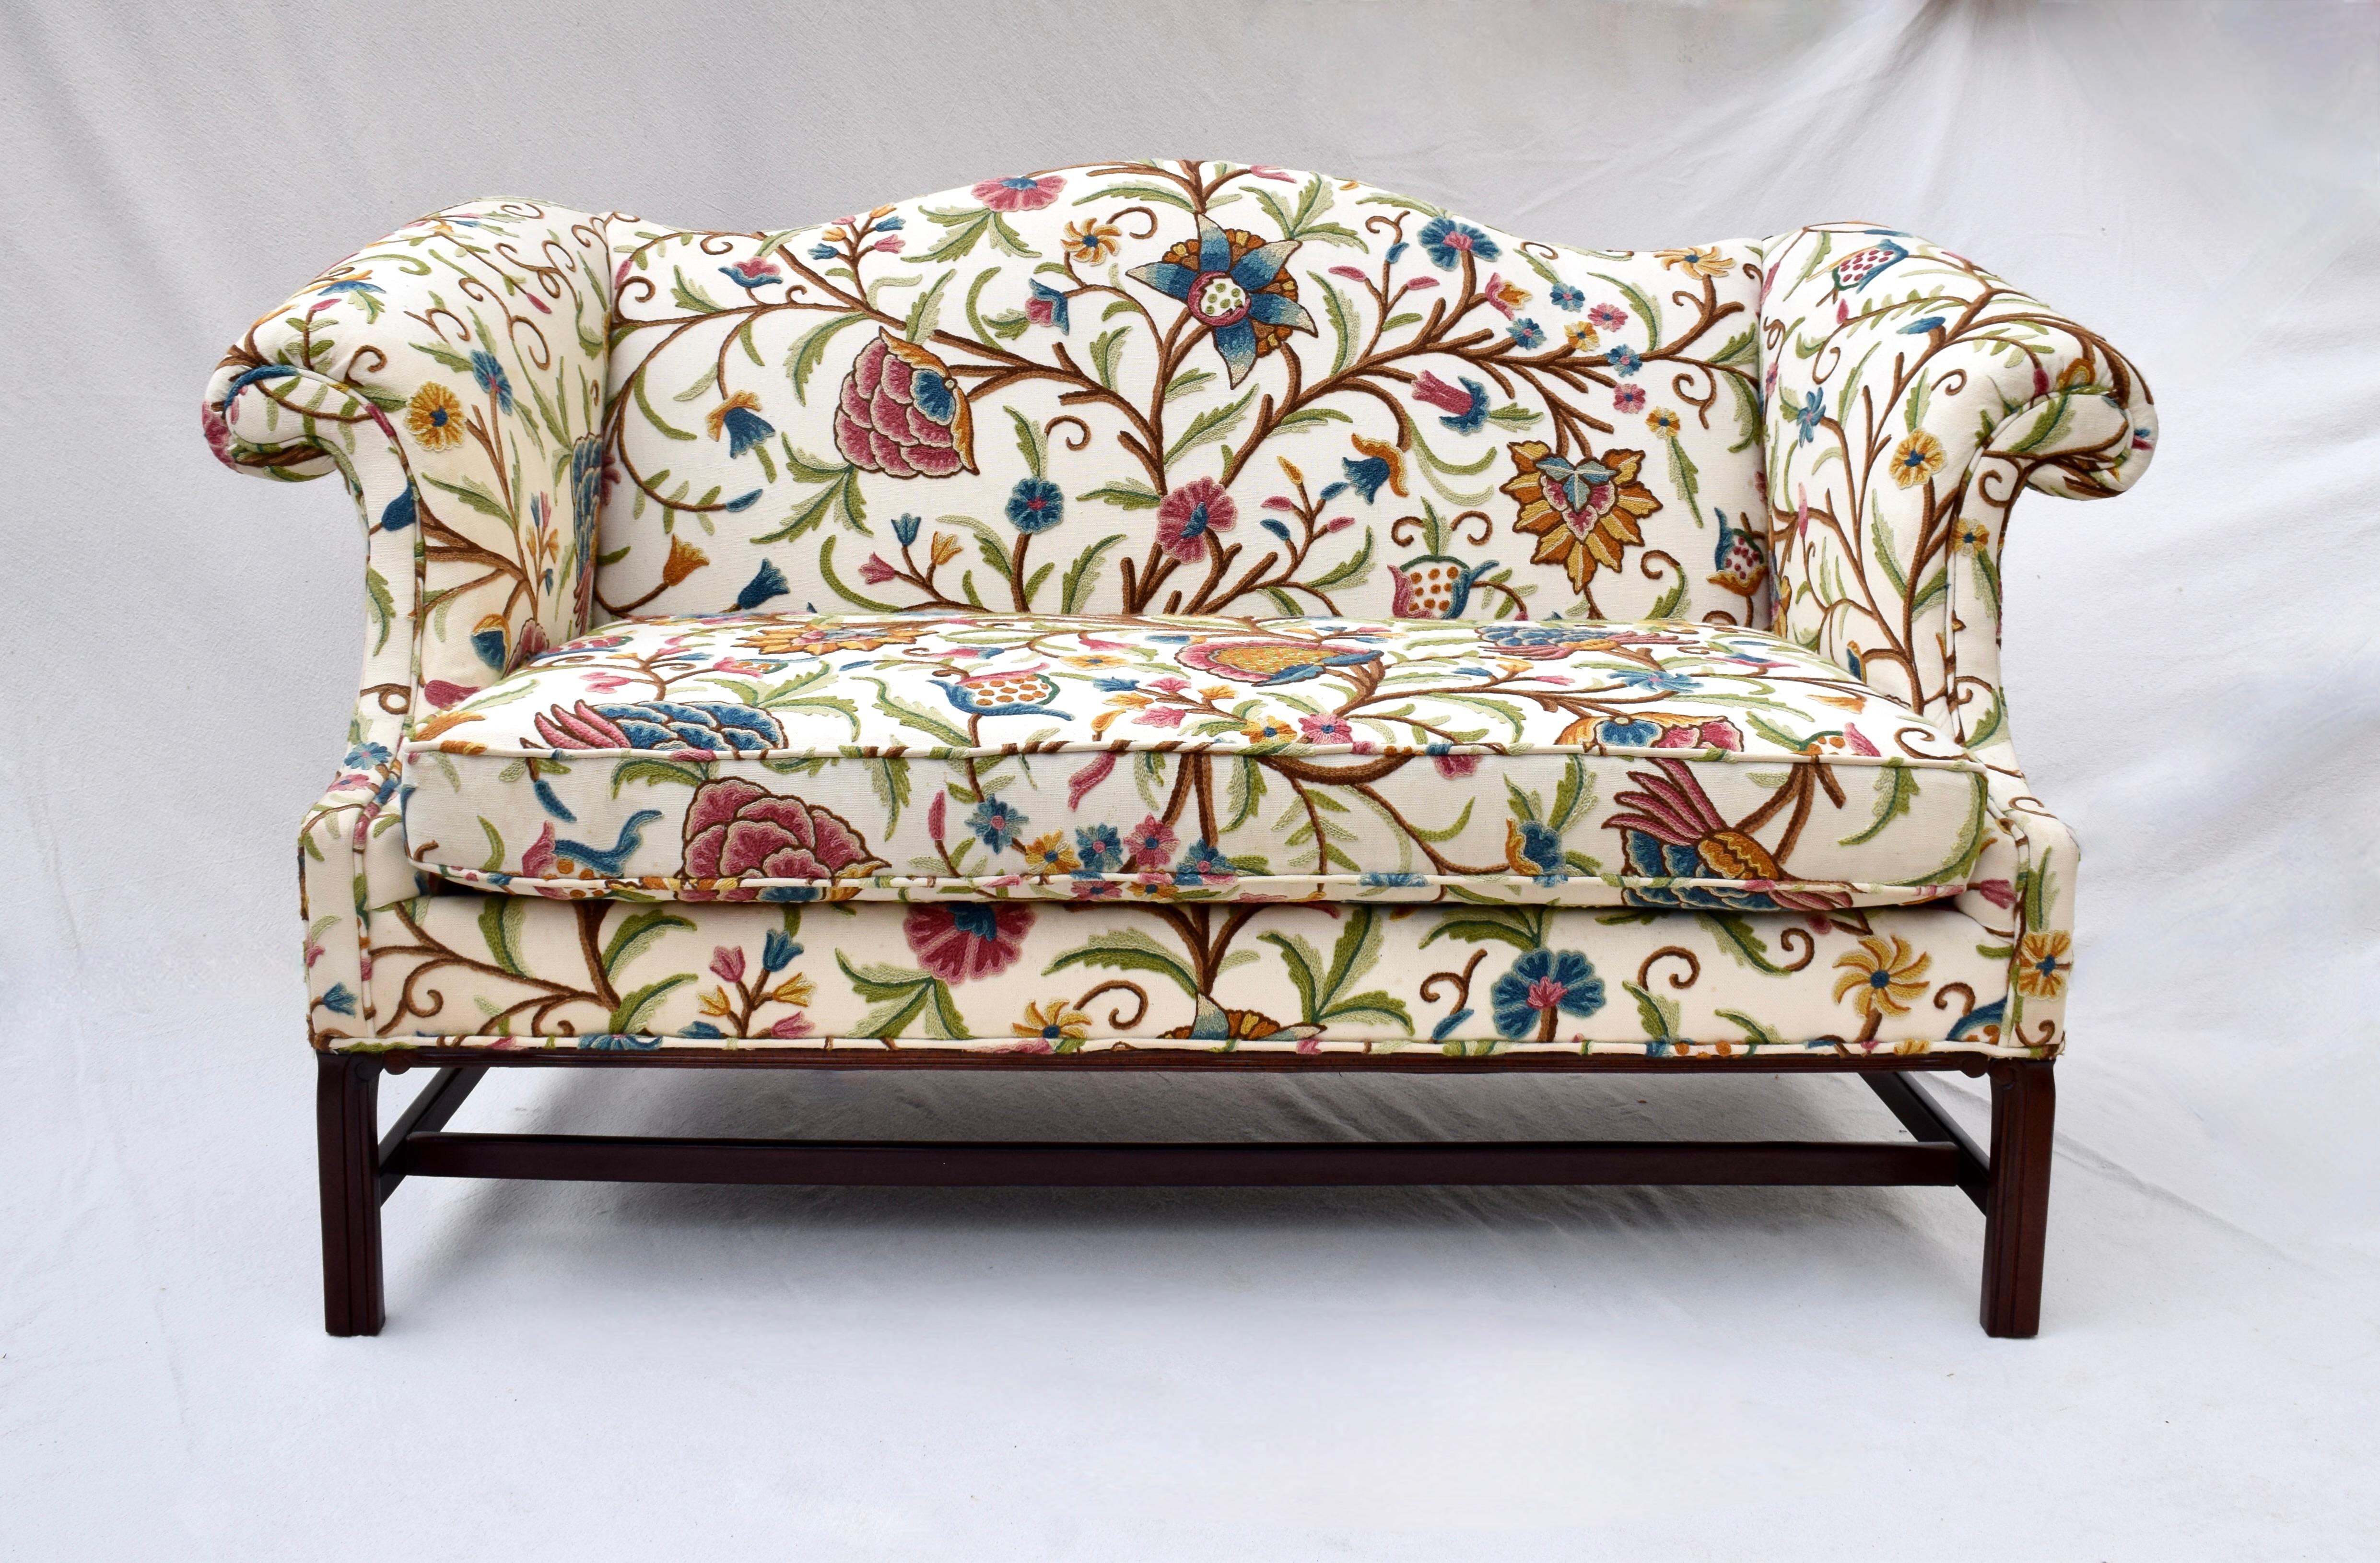 Edwardian camel back Chippendale style loveseat sofa in original English Crewel embroidered upholstery. An extremely comfortable loveseat boasting heirloom quality typical of Hancock & Moore Furniture. Original tags are in tact. Seat: 19